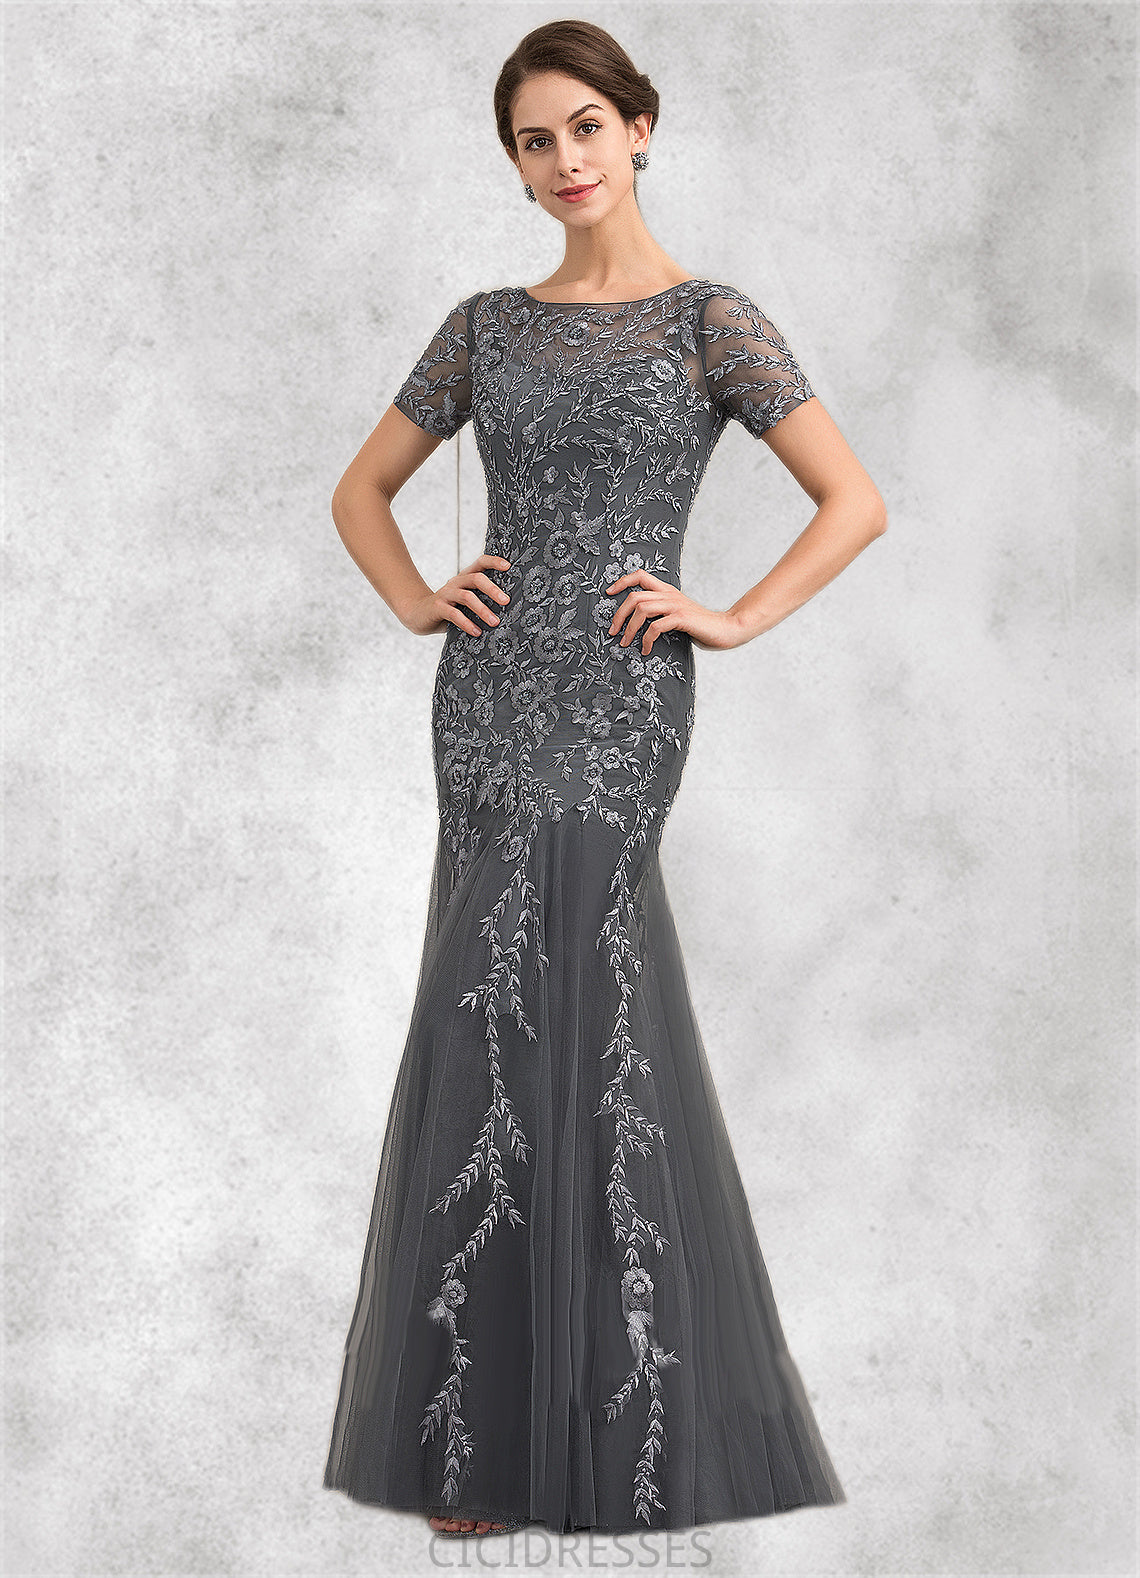 Willow Trumpet/Mermaid Scoop Neck Floor-Length Tulle Lace Mother of the Bride Dress With Beading Sequins CIC8126P0014767